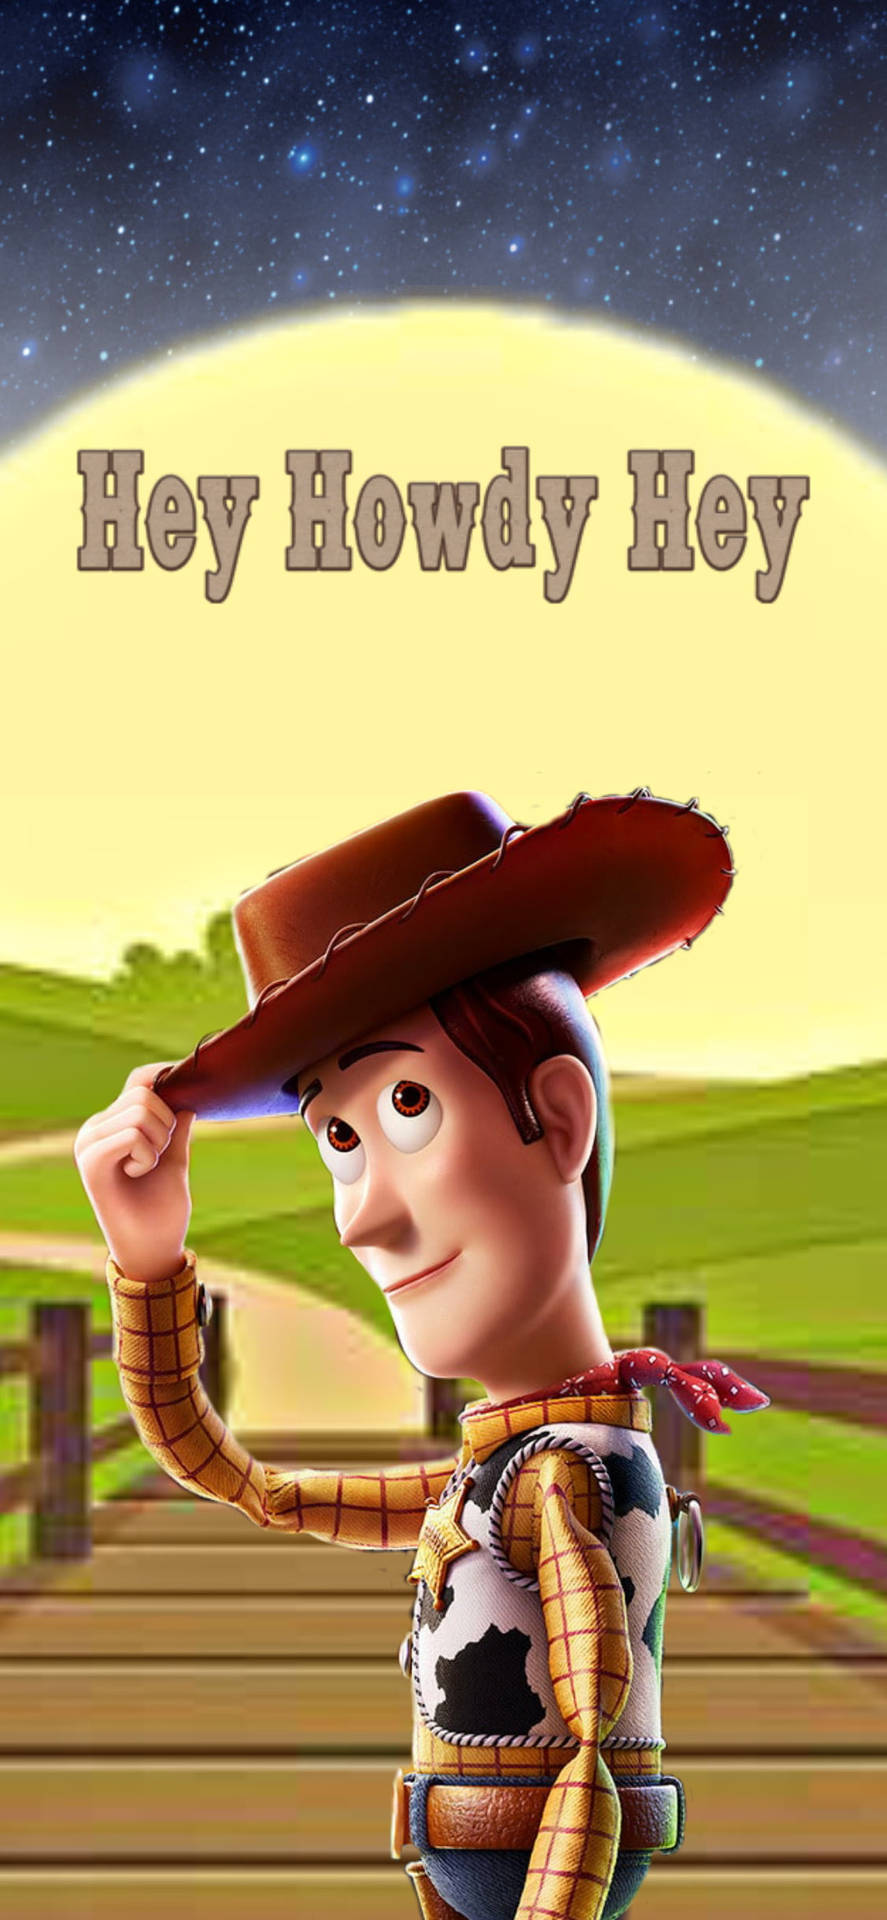 Toy Story 3 Sheriff Woody Wallpaper